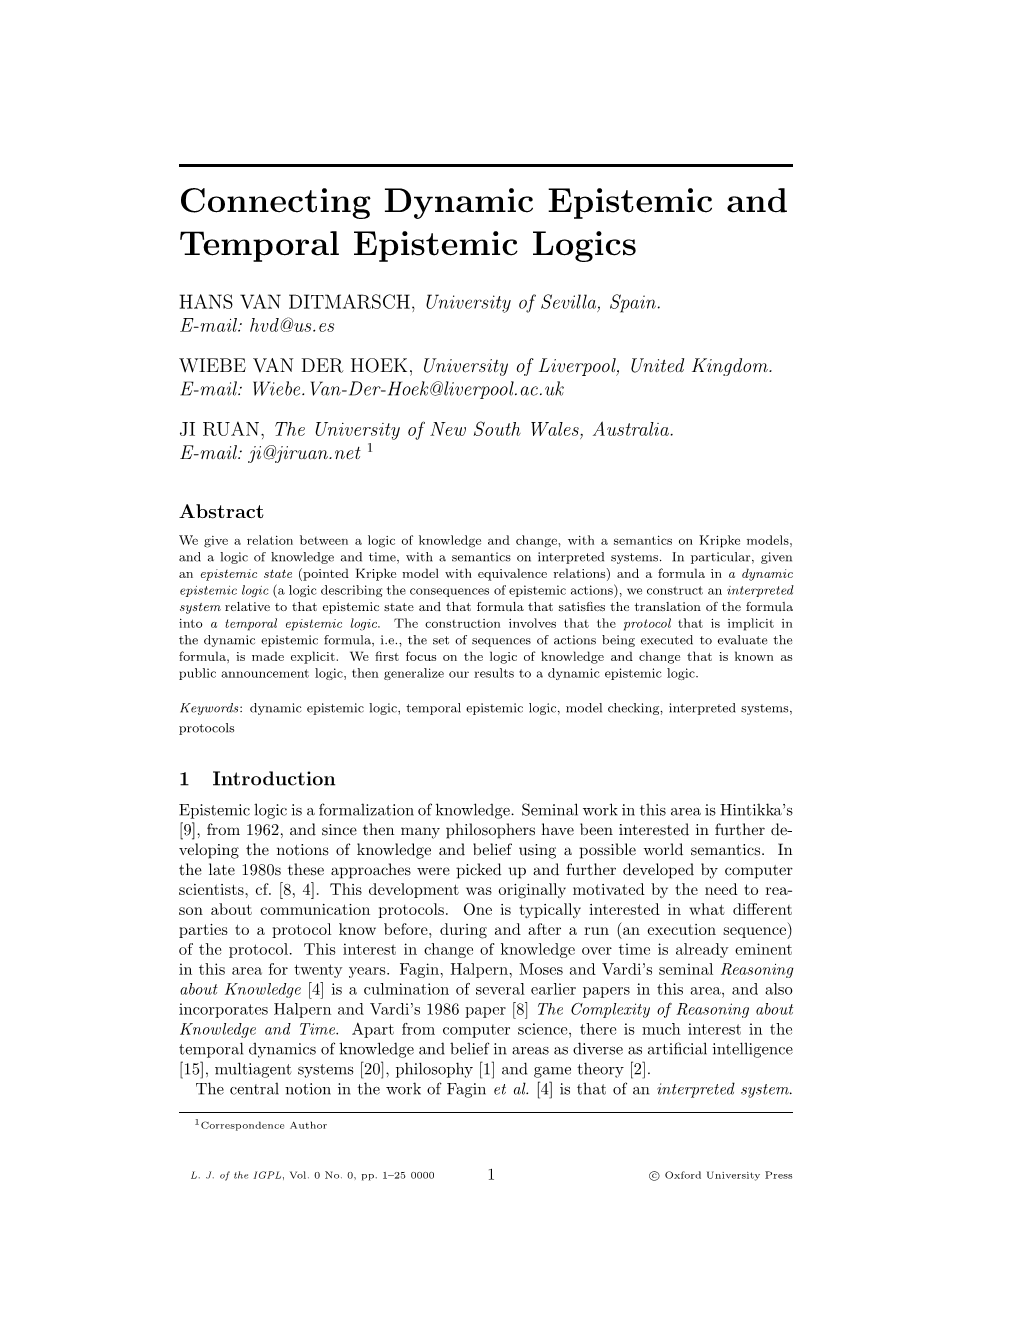 Connecting Dynamic Epistemic and Temporal Epistemic Logics